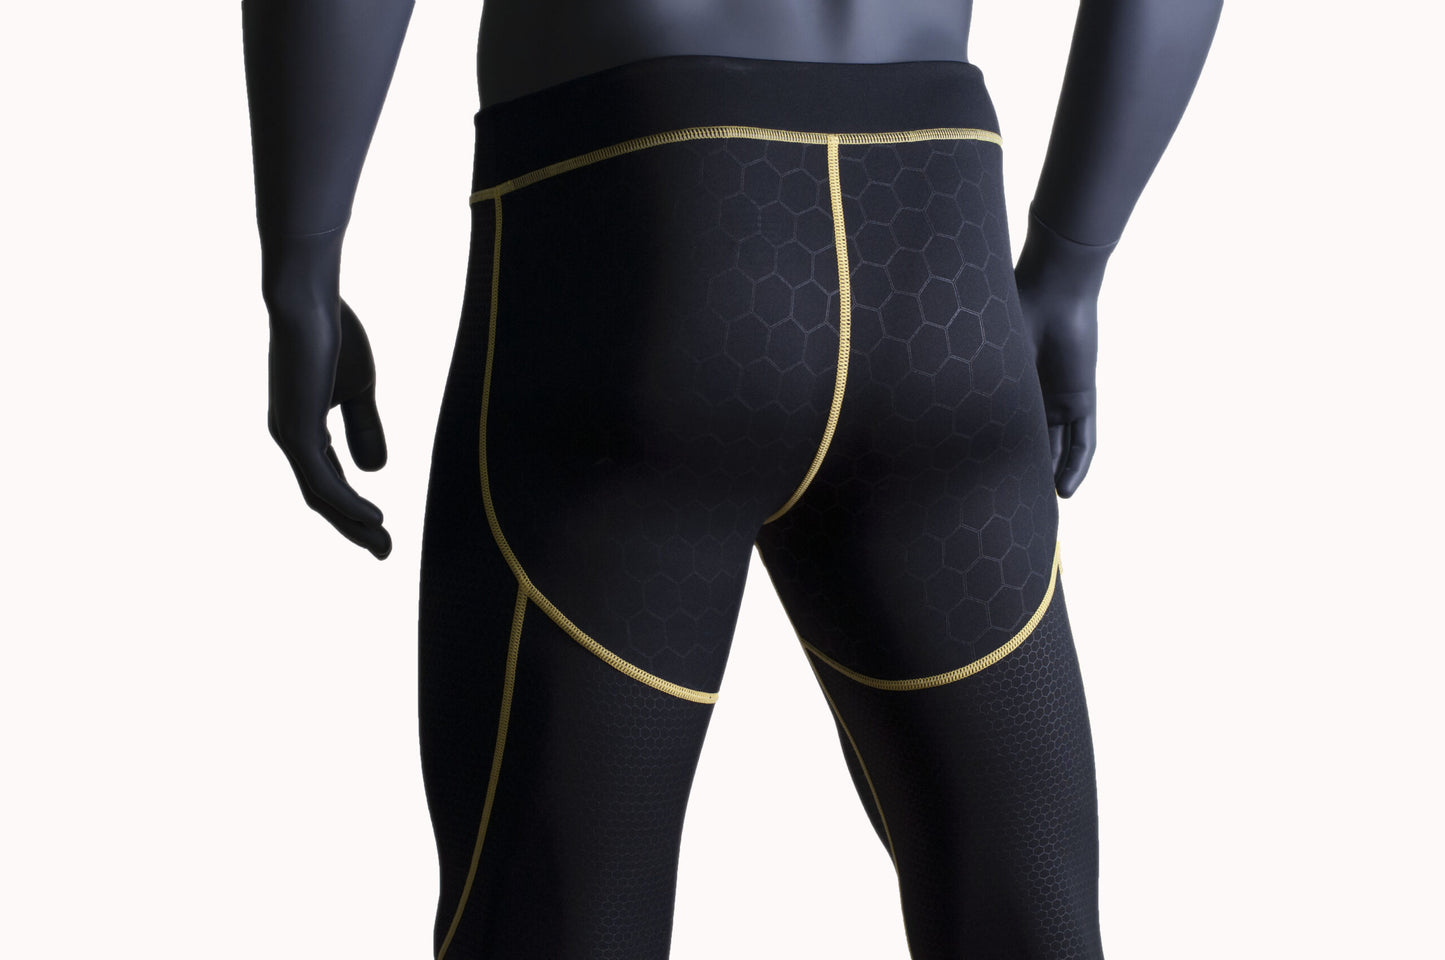 Night Prowler Apparel Black men's leggings with yellow piping and raised honeycomb textured patterns Back view 